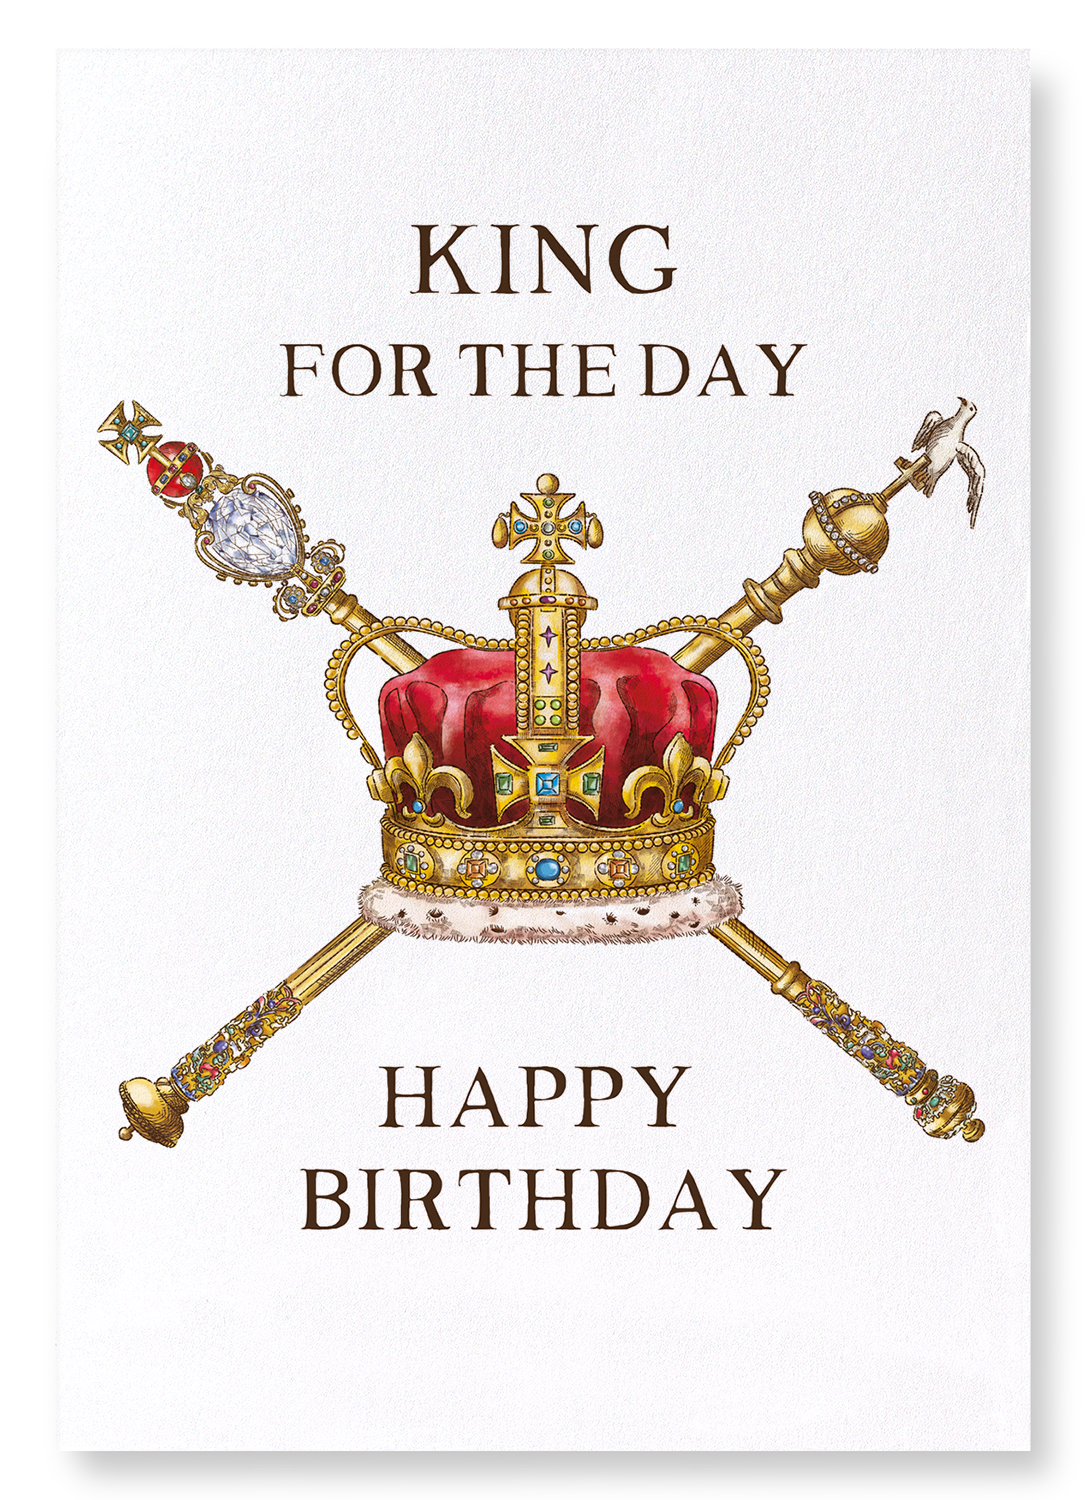 KING FOR THE DAY: Victorian Art Print